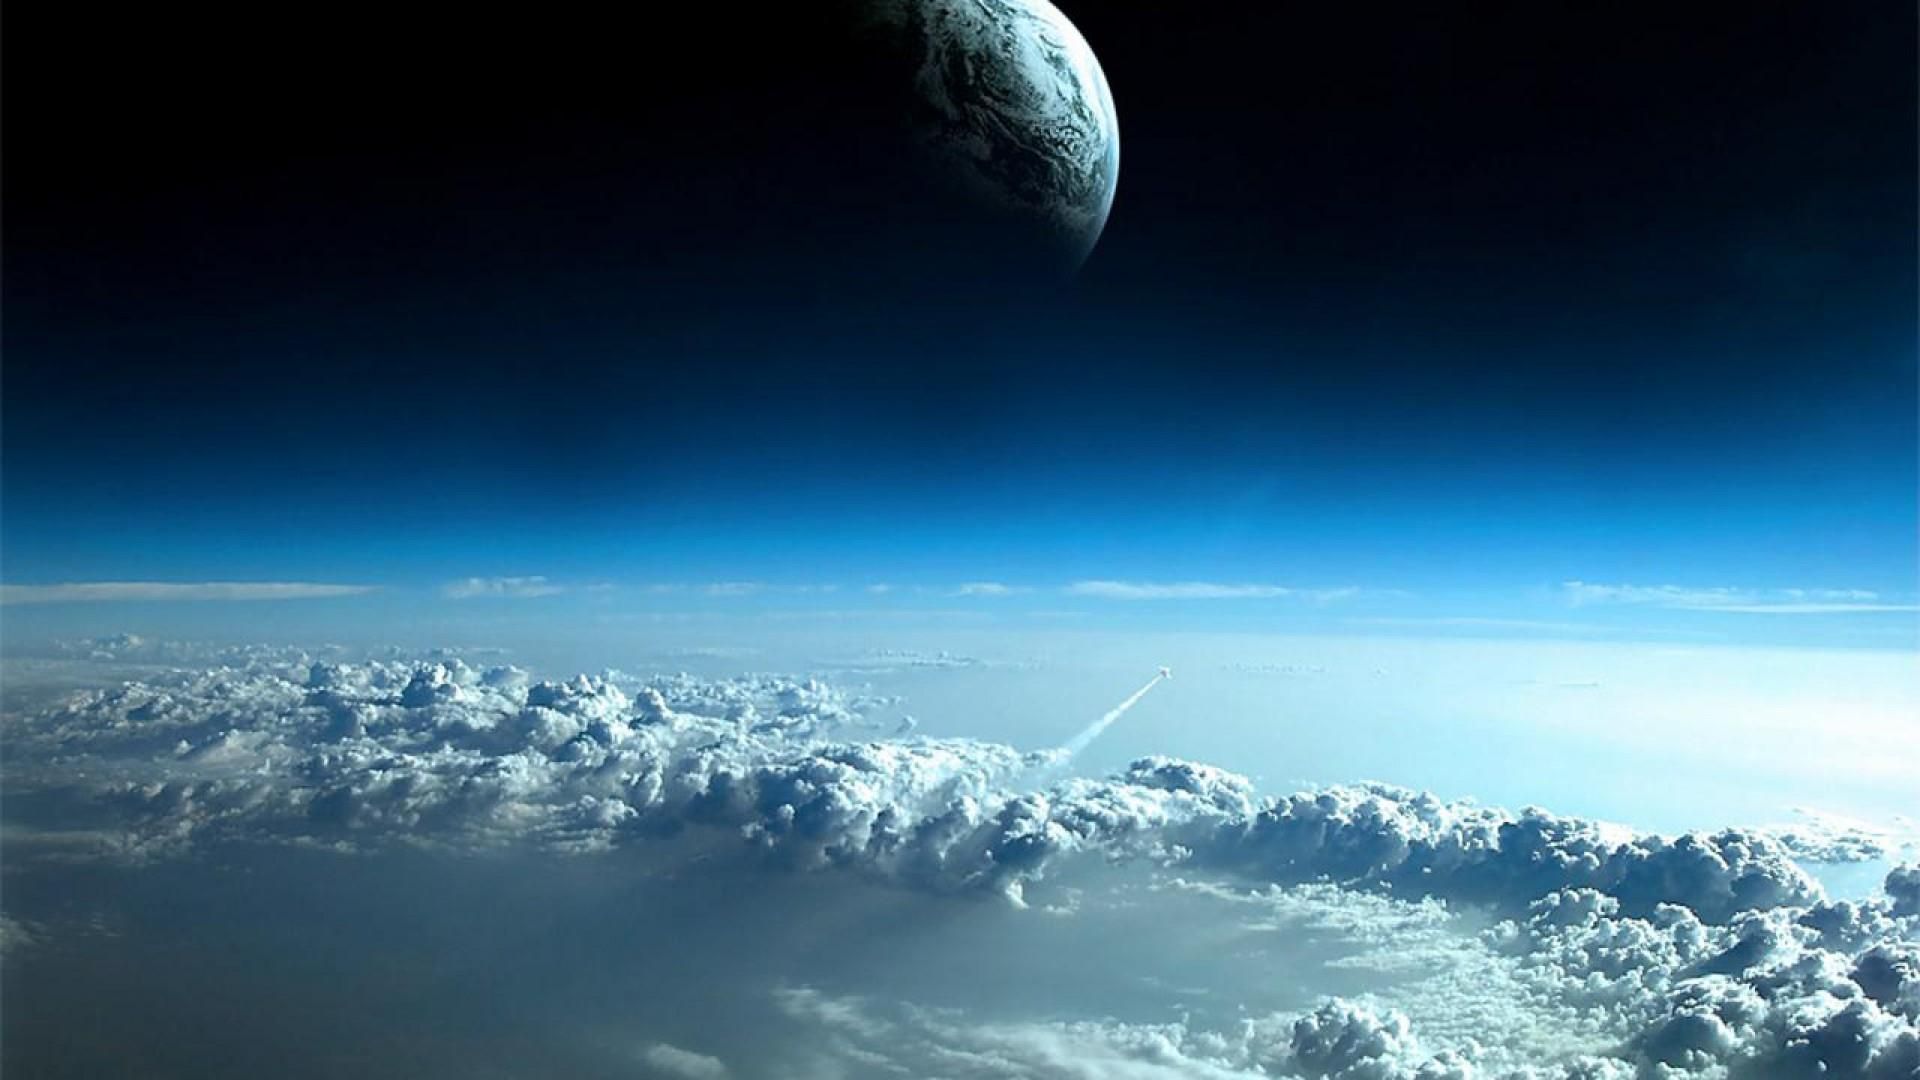 1080p Space Wallpapers Download Free | HD Wallpapers Range